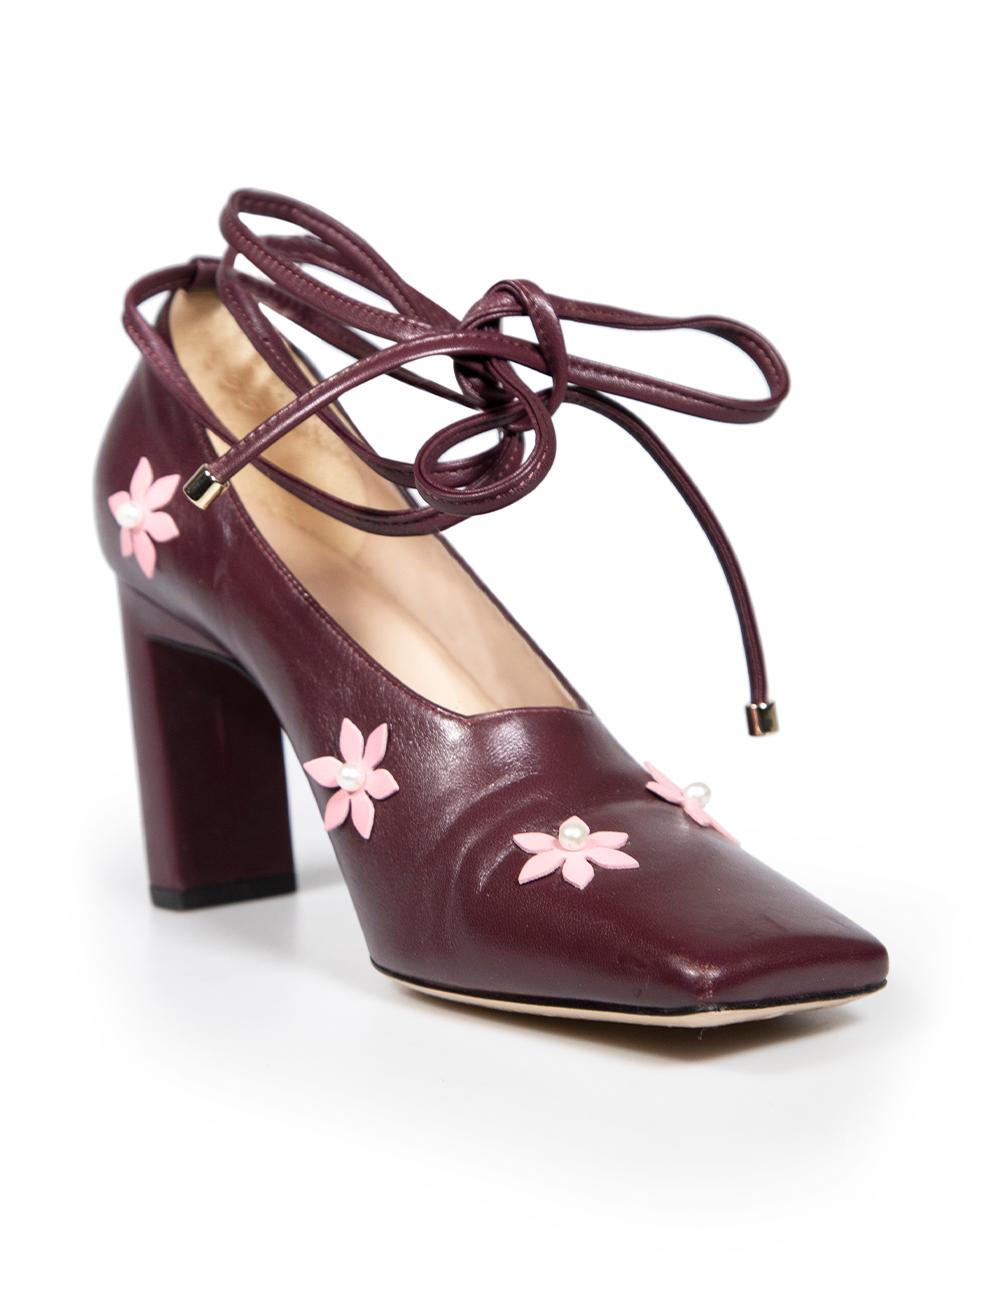 CONDITION is Very good. Minimal wear to shoes is evident. Minimal wear to both shoe toes and the right shoe heel on this used Wandler designer resale item.
 
 Details
 Burgundy
 Leather
 Heels
 Square toe
 Floral embellished
 Mid heel
 Ankle tie